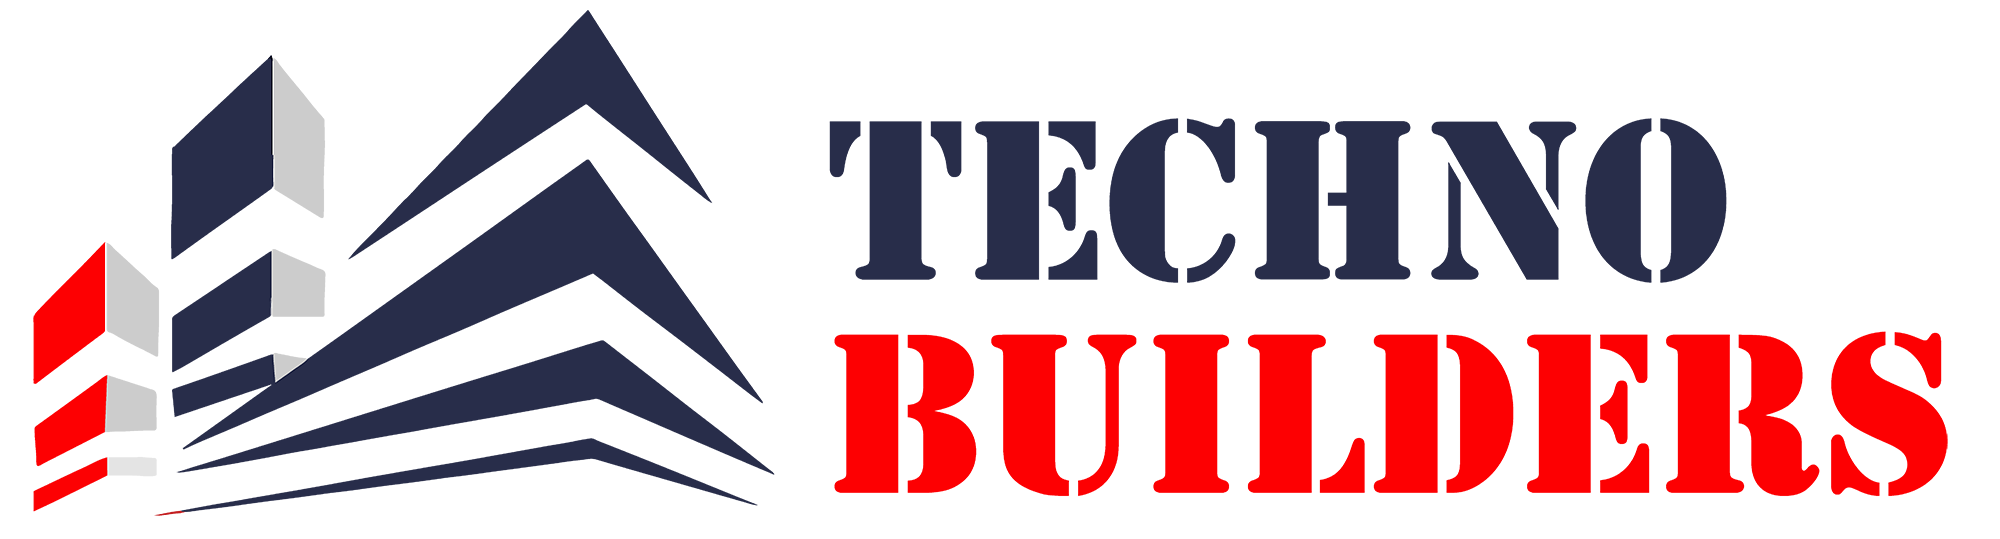 Techno Builders Group